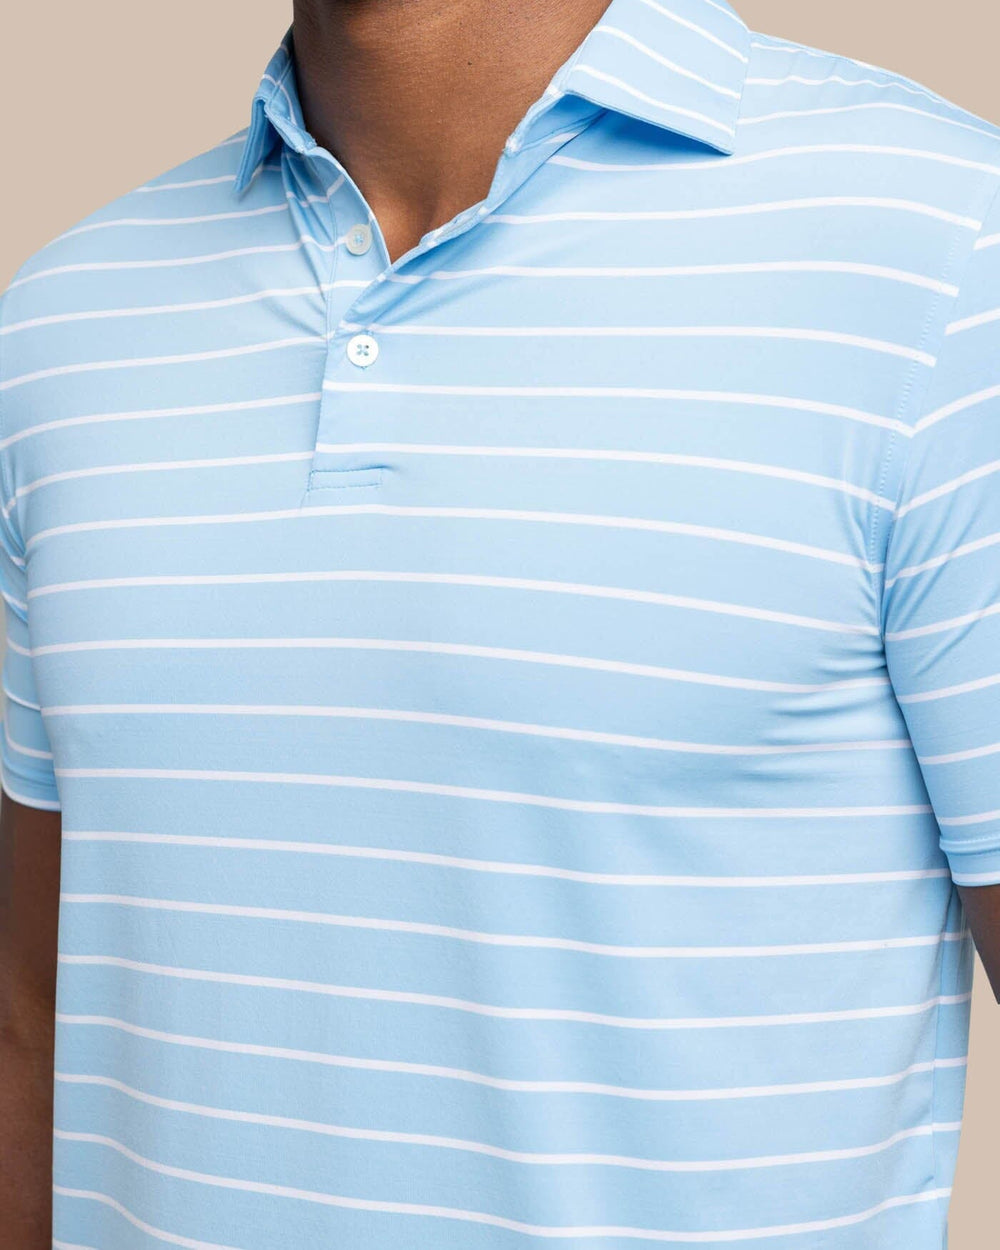 The detail view of the Southern Tide brrr-eeze Desmond Stripe Performance Polo by Southern Tide - Rush Blue